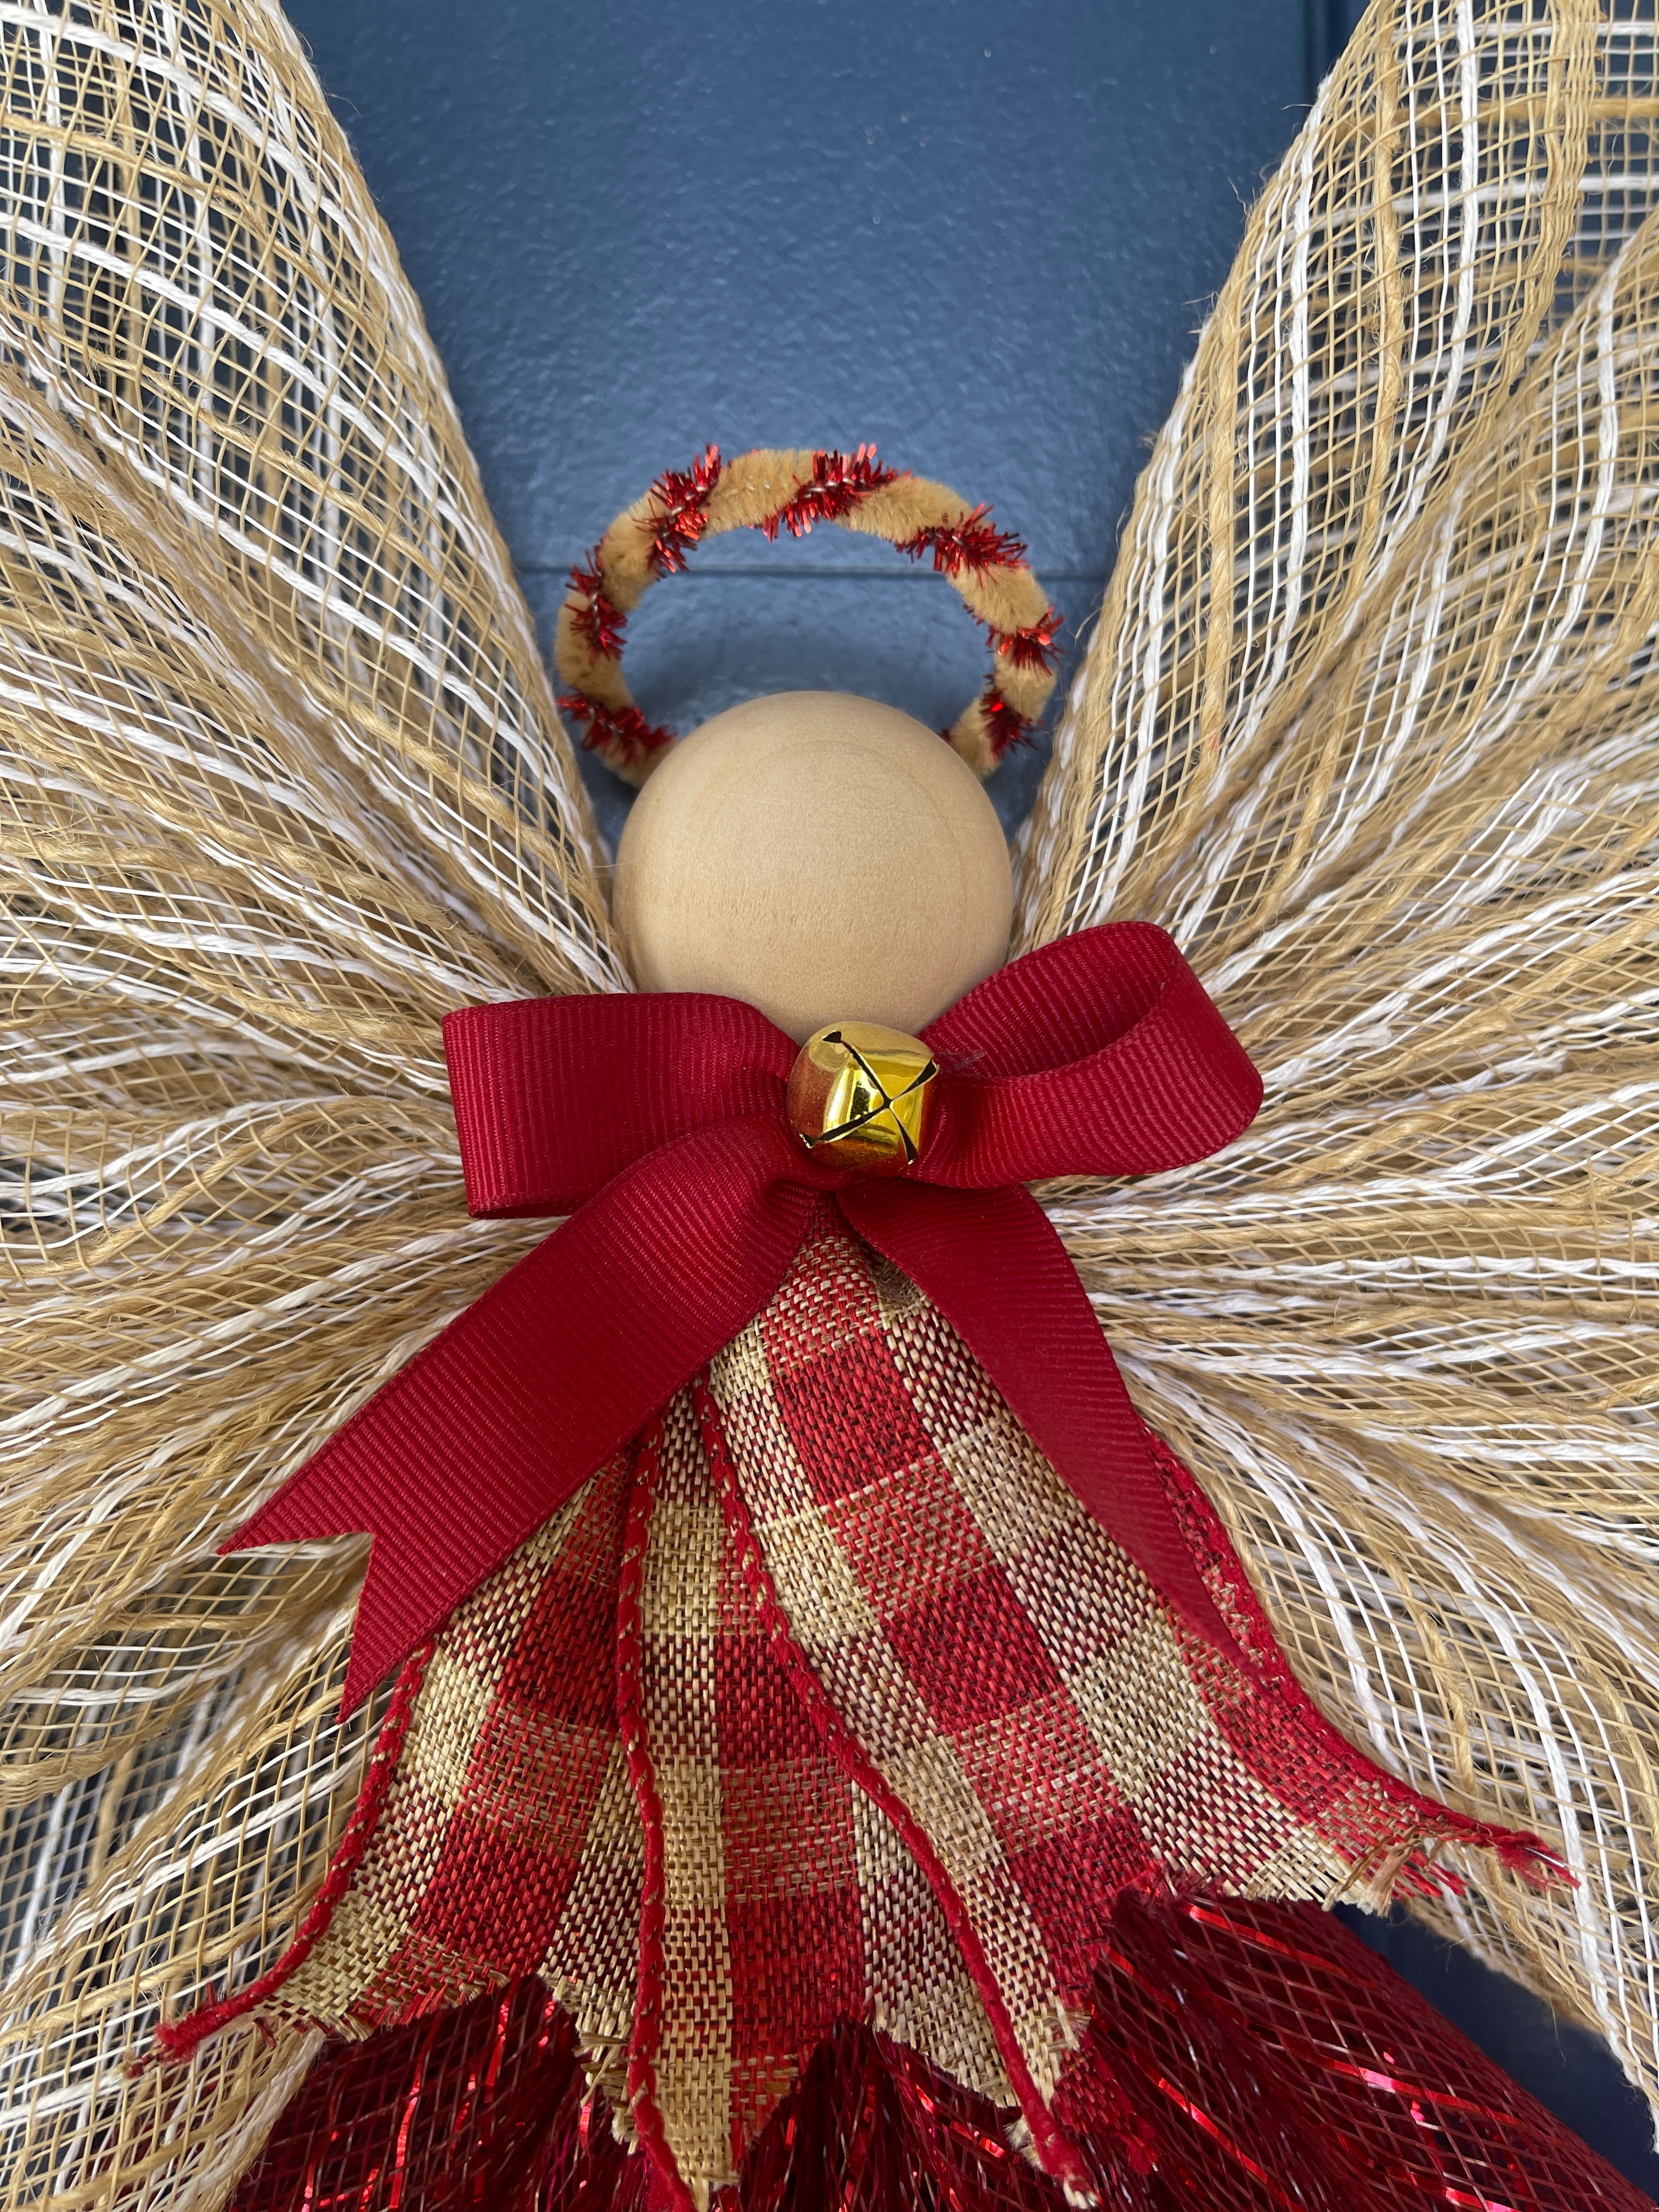 Close Up View of Wooden Head, with a Tan and Red Metallic Halo, Gold Bell on a Red Bow and Red and Tan Plaid Apron 